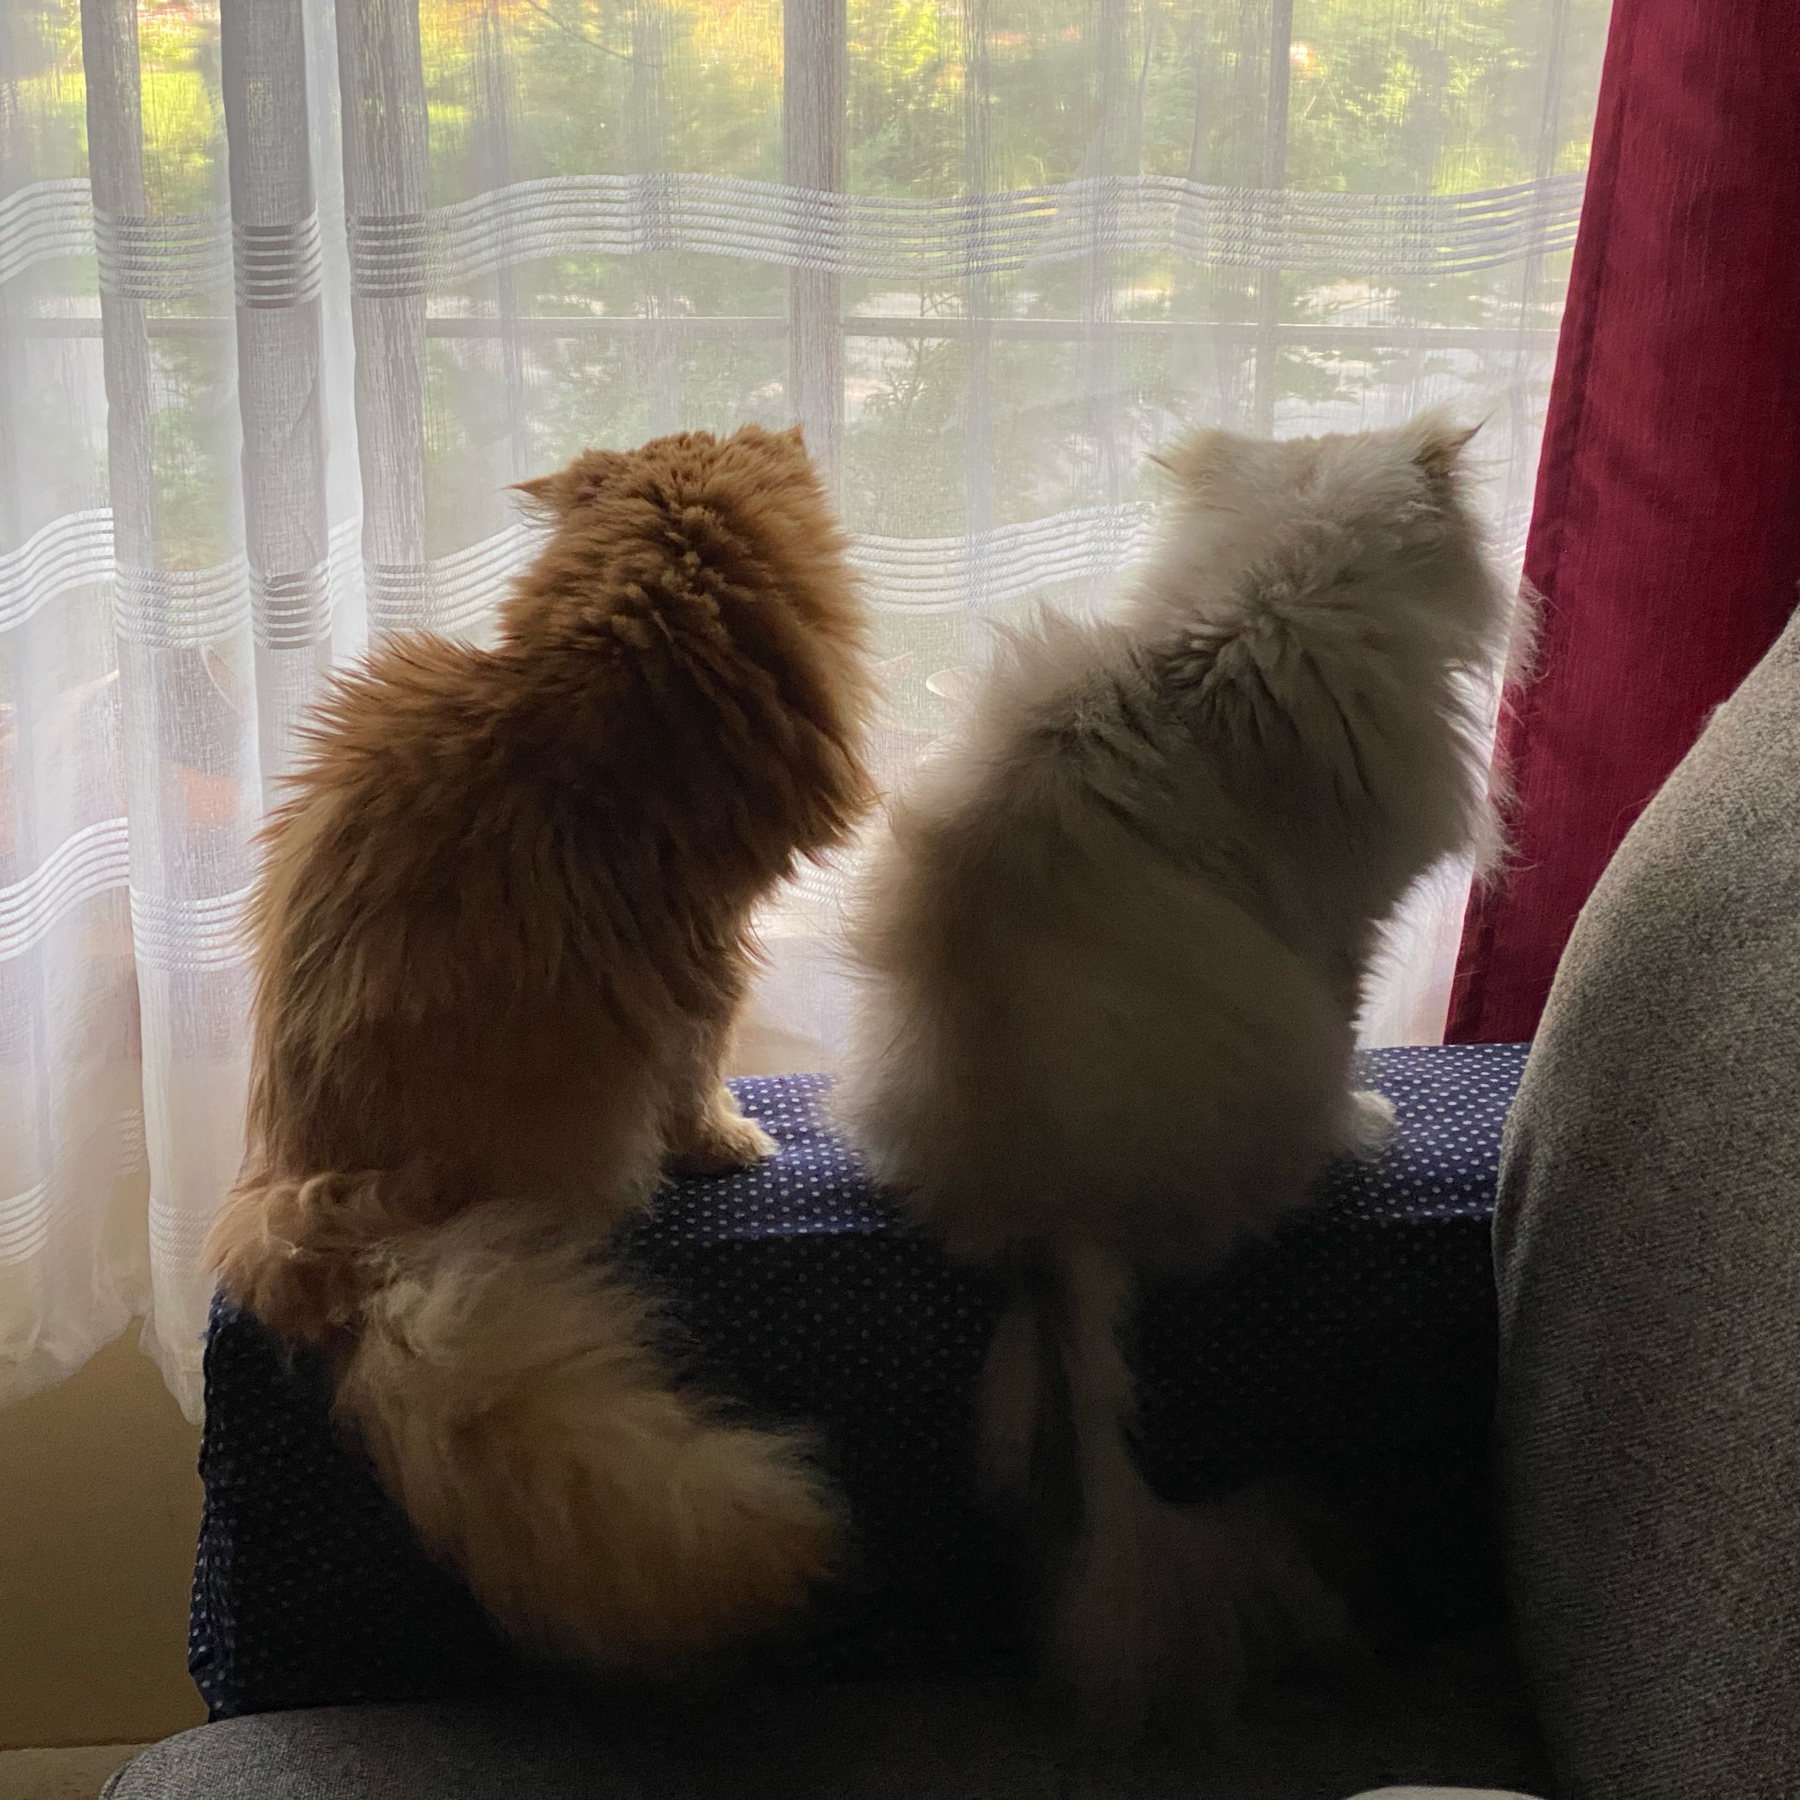 Two cats on the arm of a sofa looking out a window.